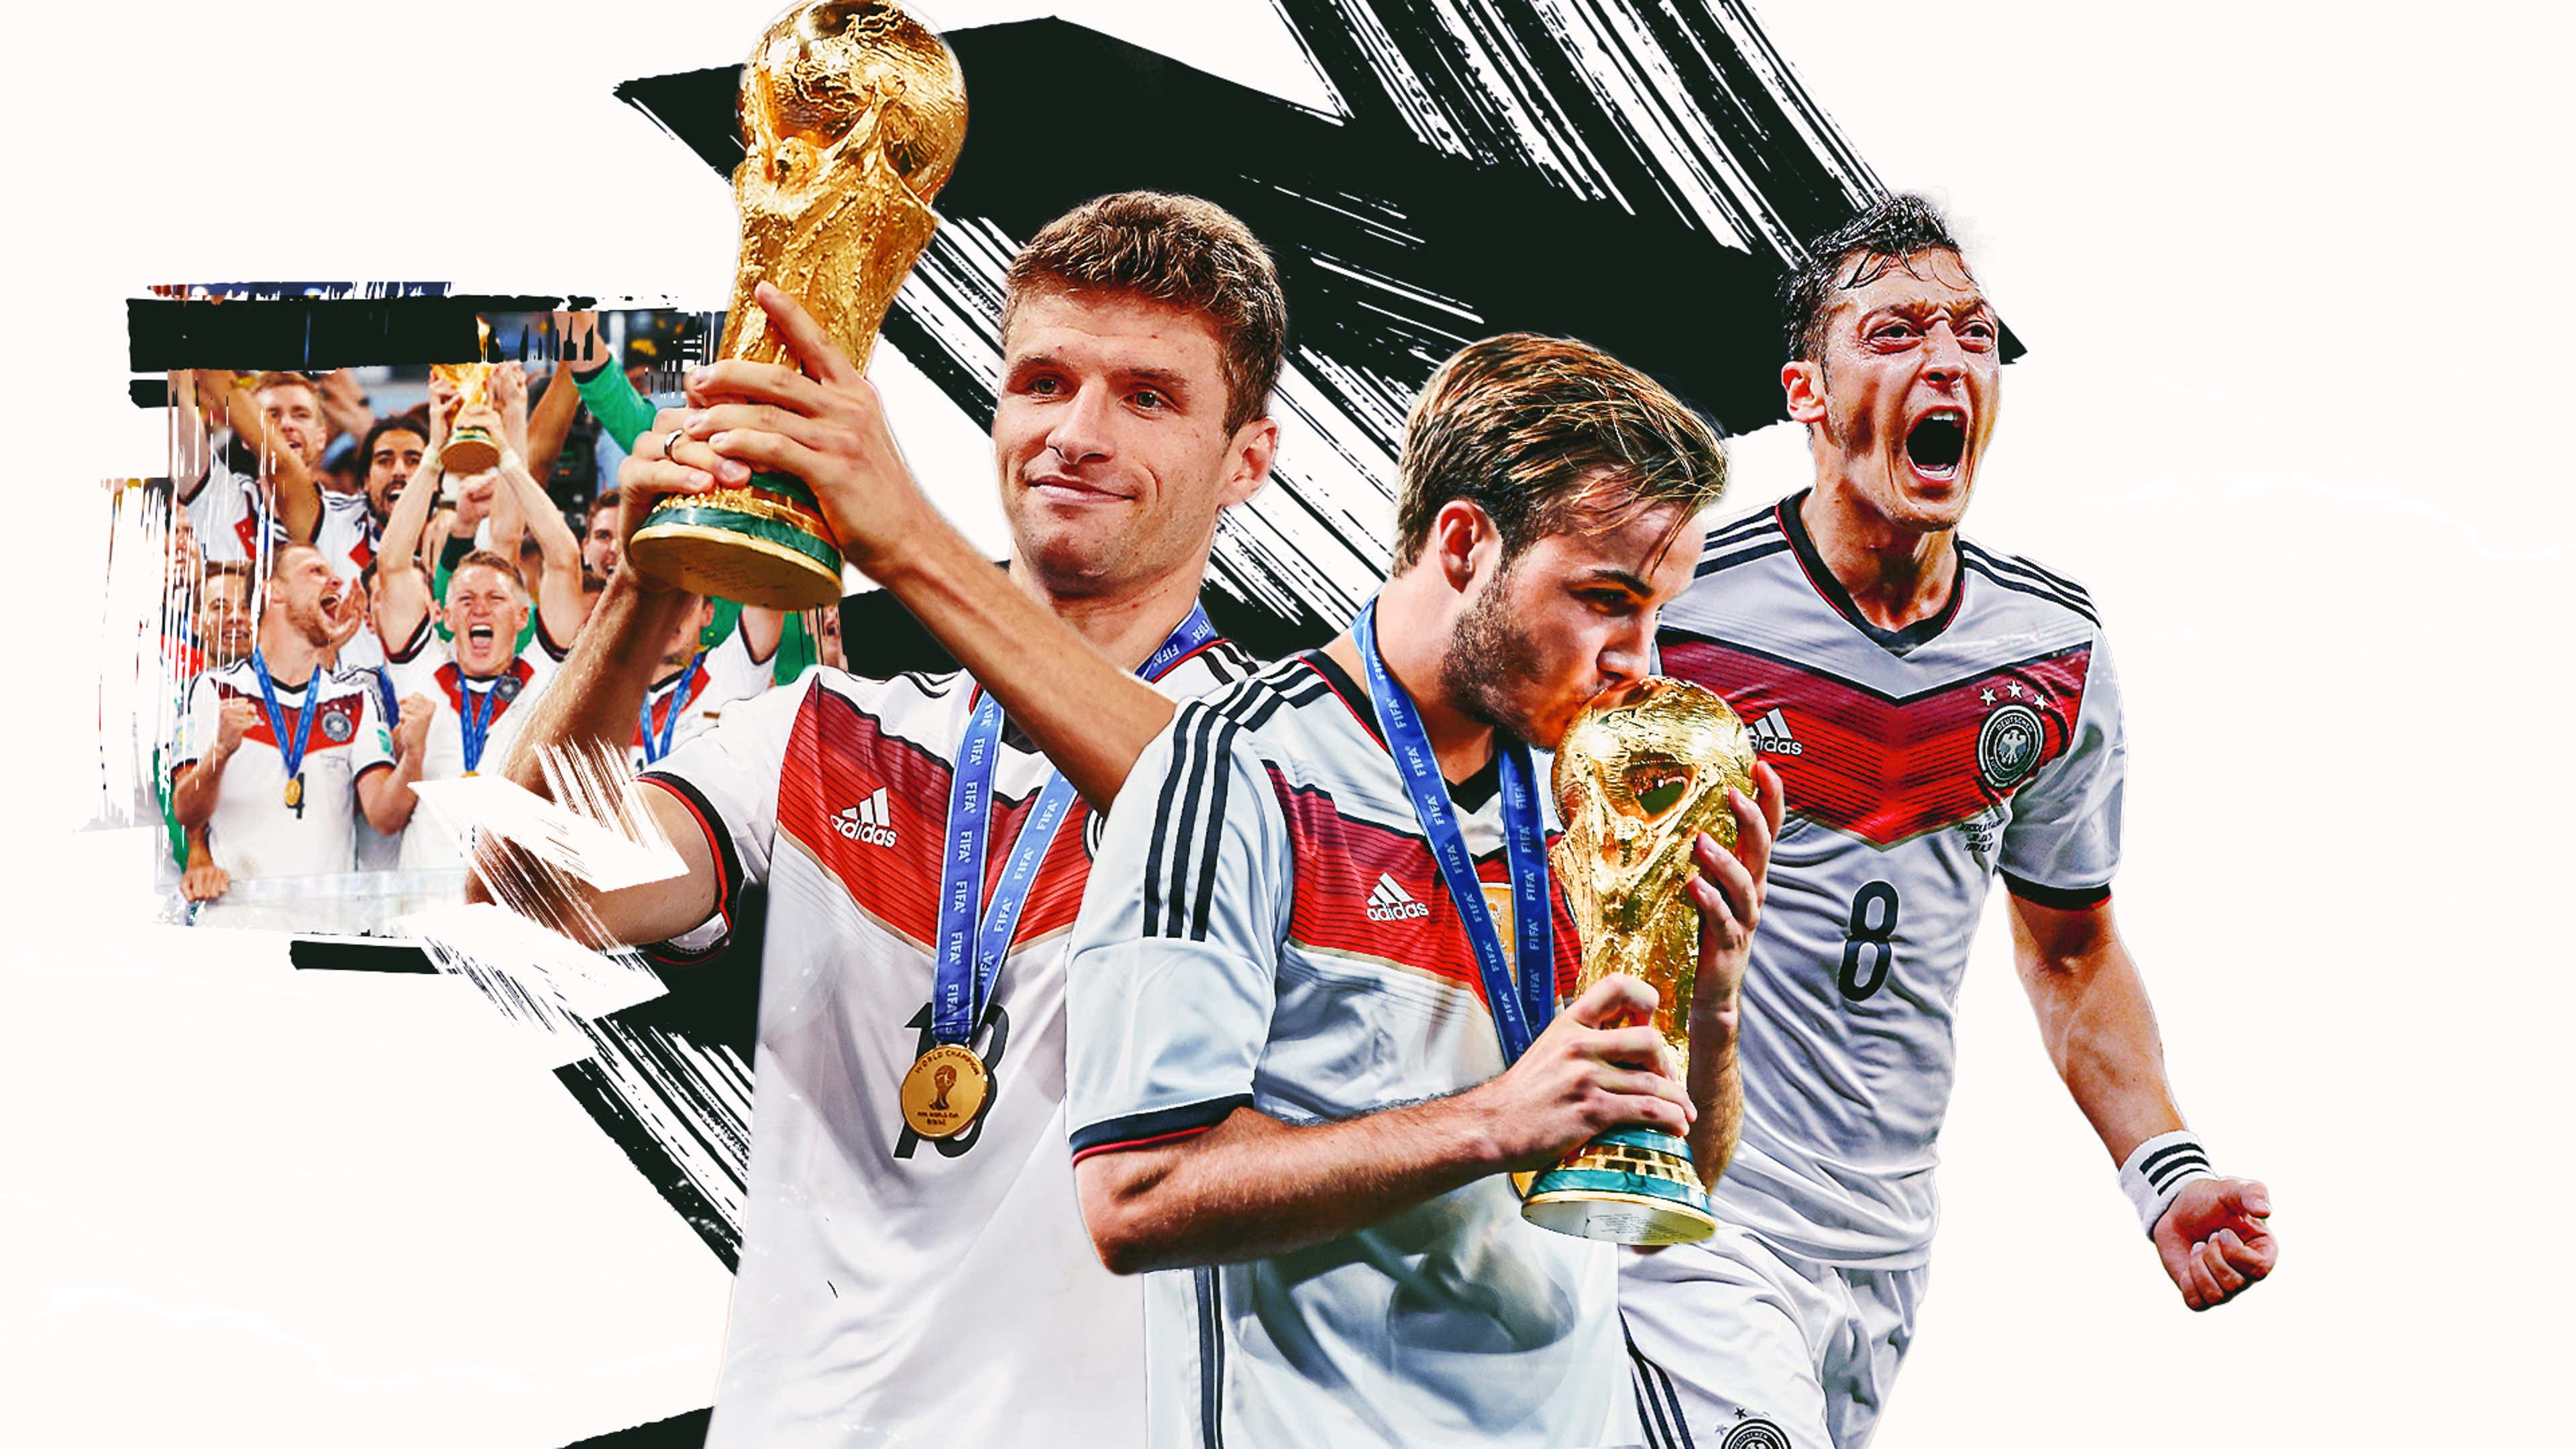 When Mario Götze and Germany won the 2014 FIFA World Cup